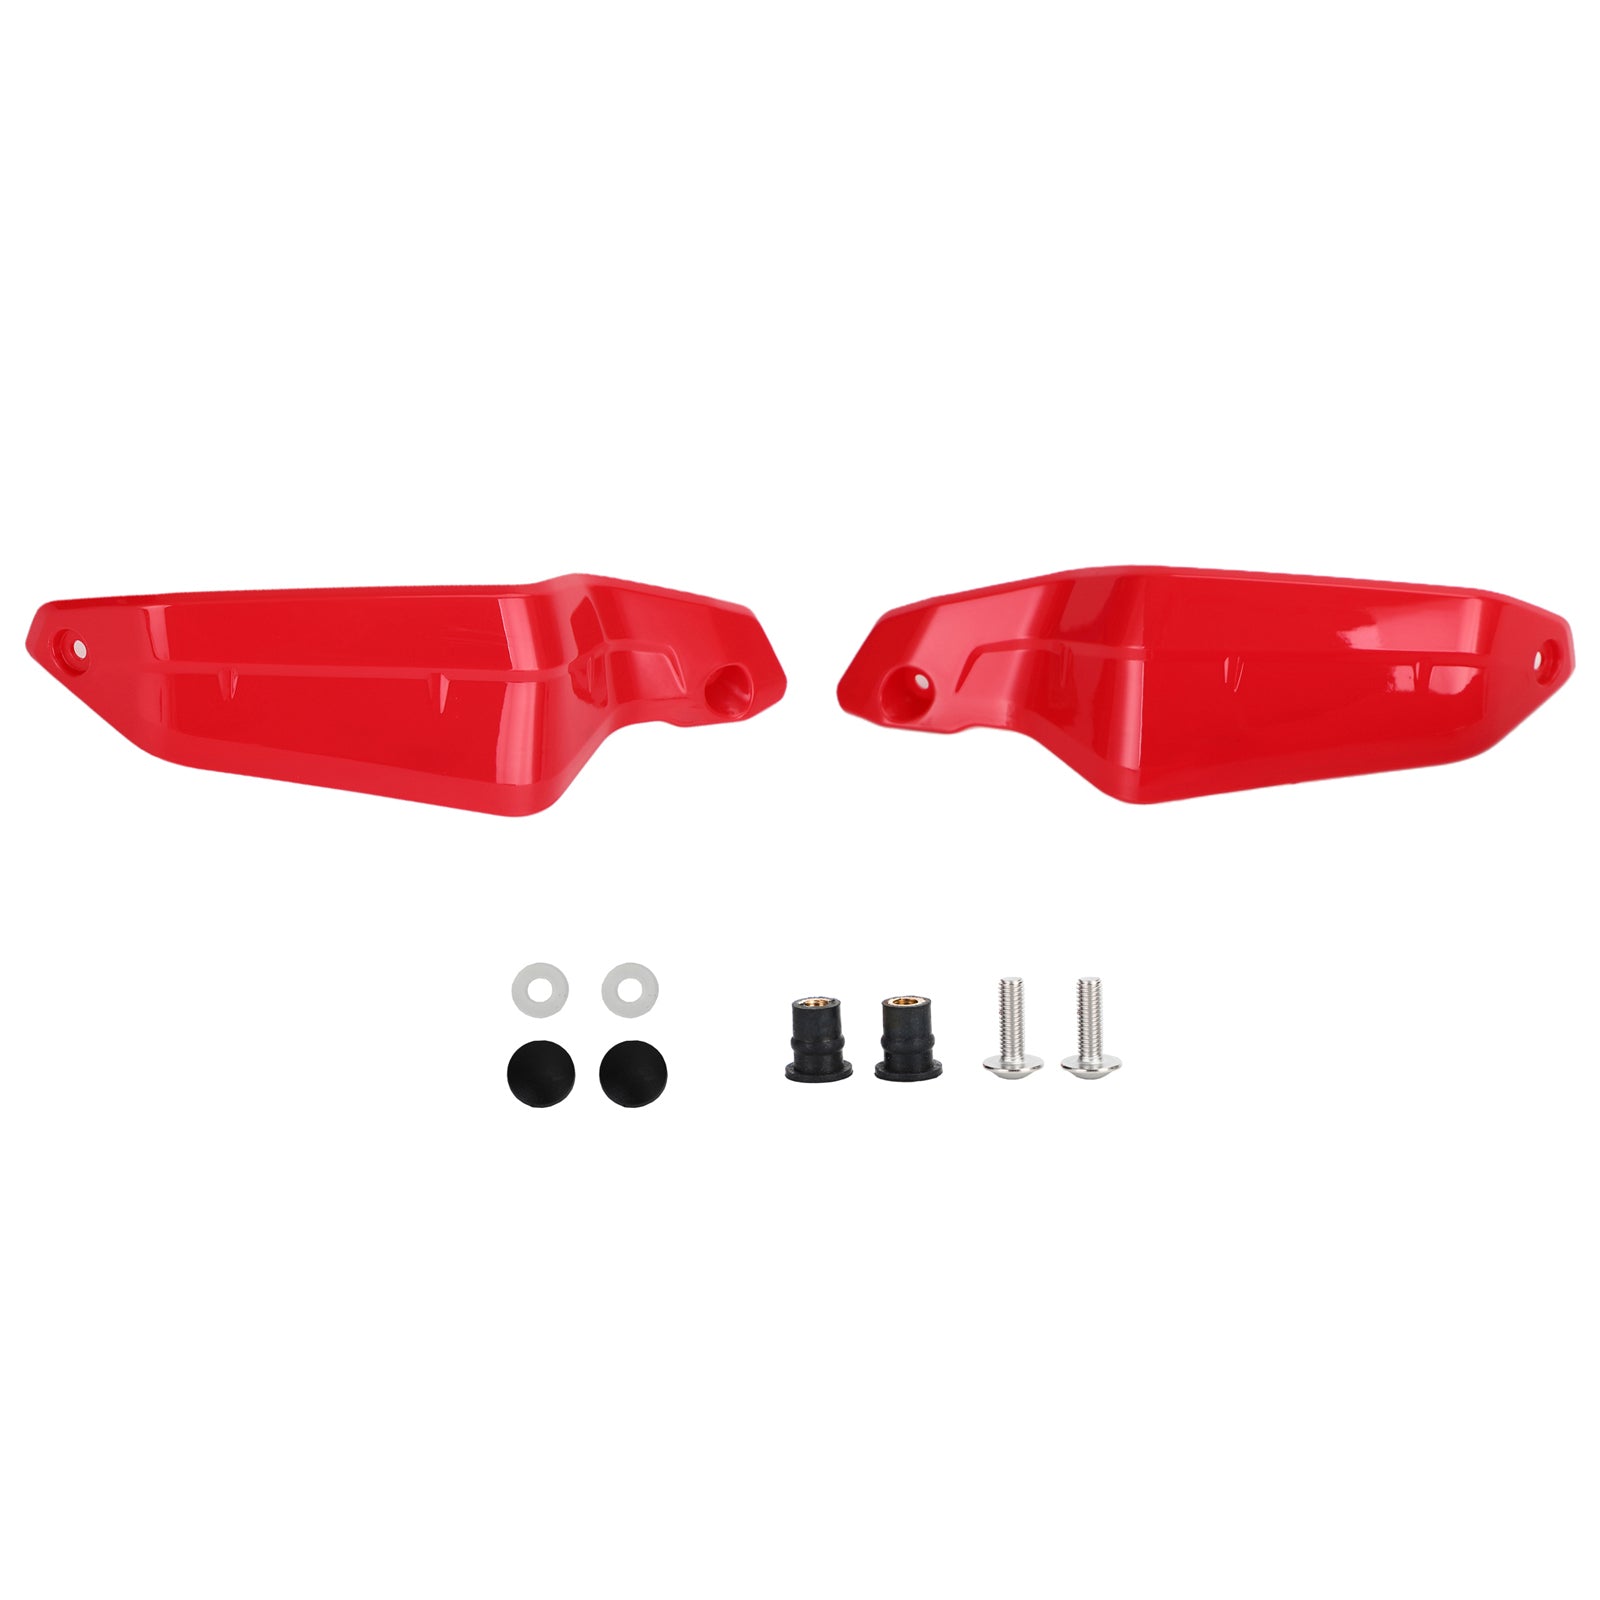 Handguard Extensions Hand Protector fit for Honda CRF1100L /ADV X-ADV750 2021 Generic